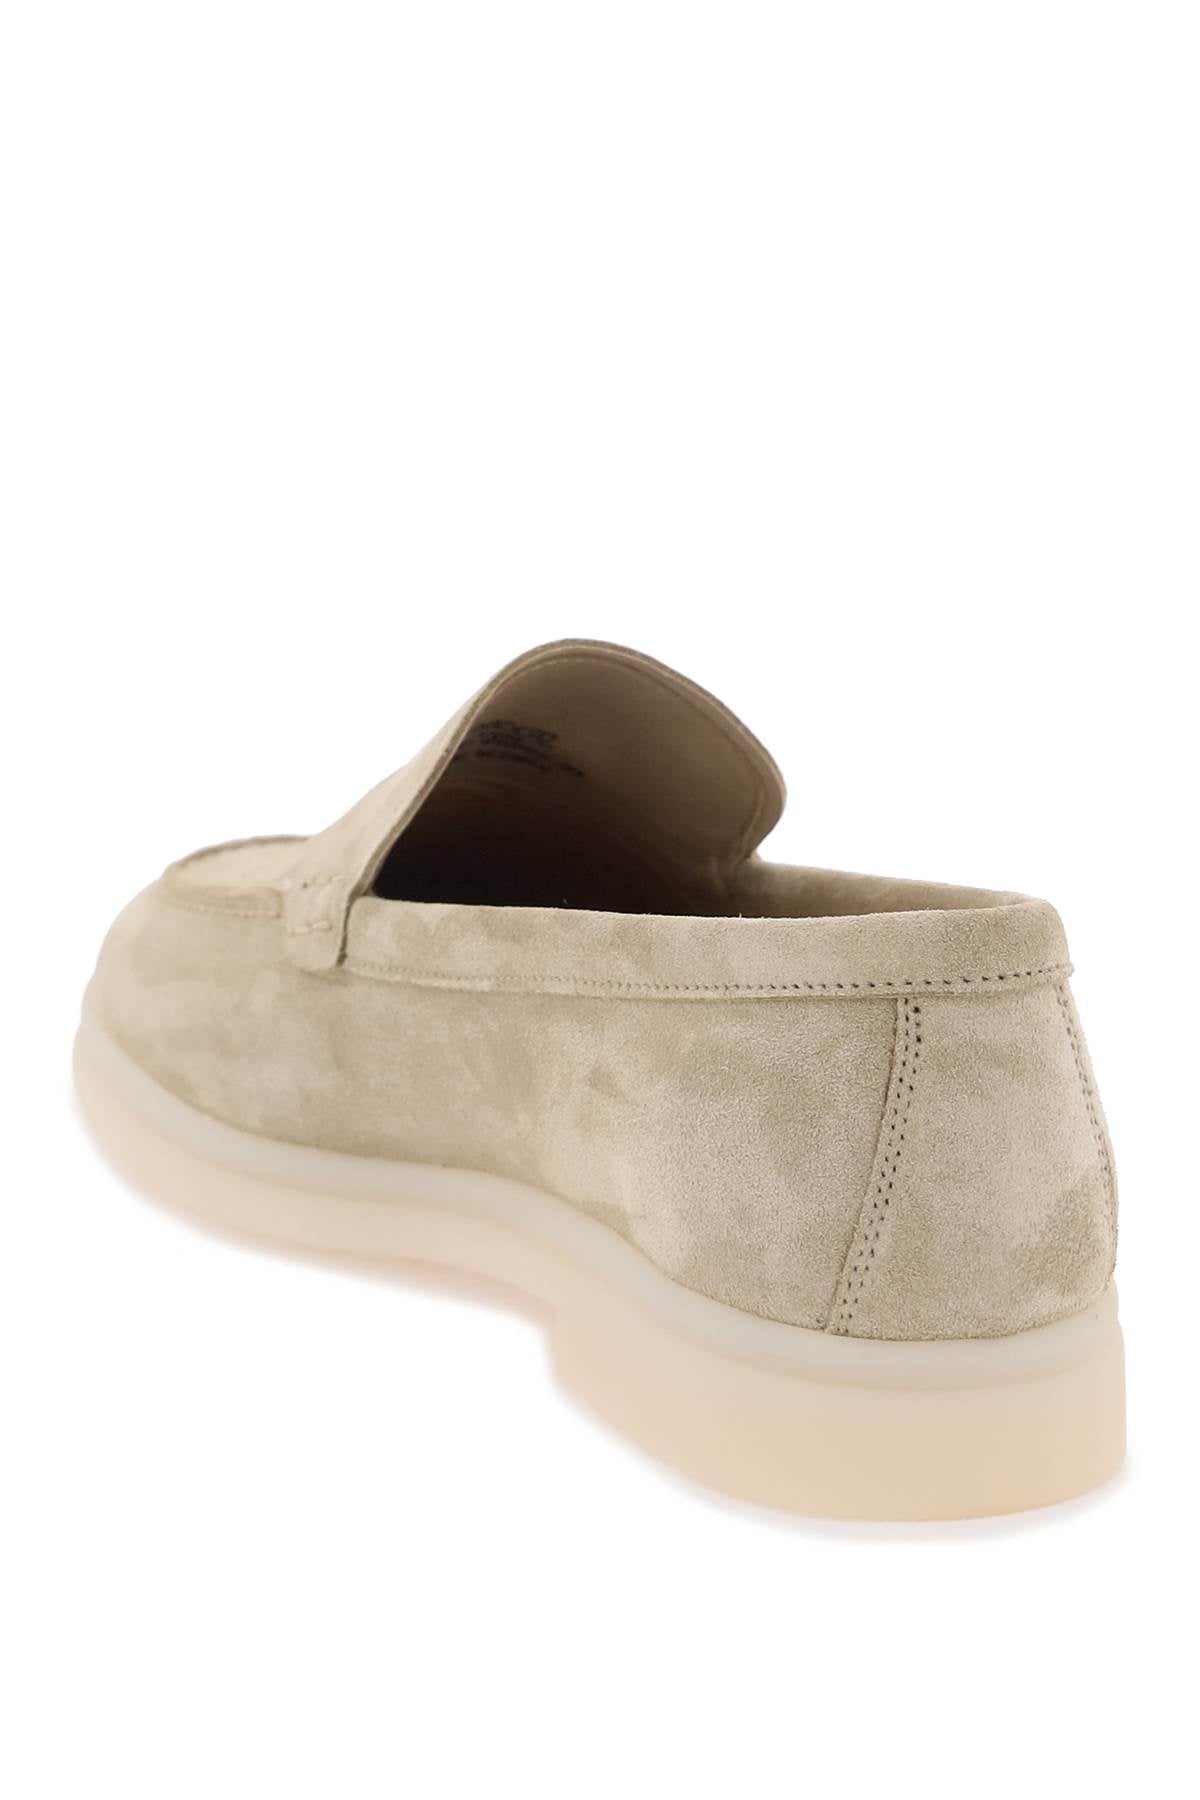 CHURCH'S Women's Suede Moccasins with Embossed Logo and Printed Sole - Tan